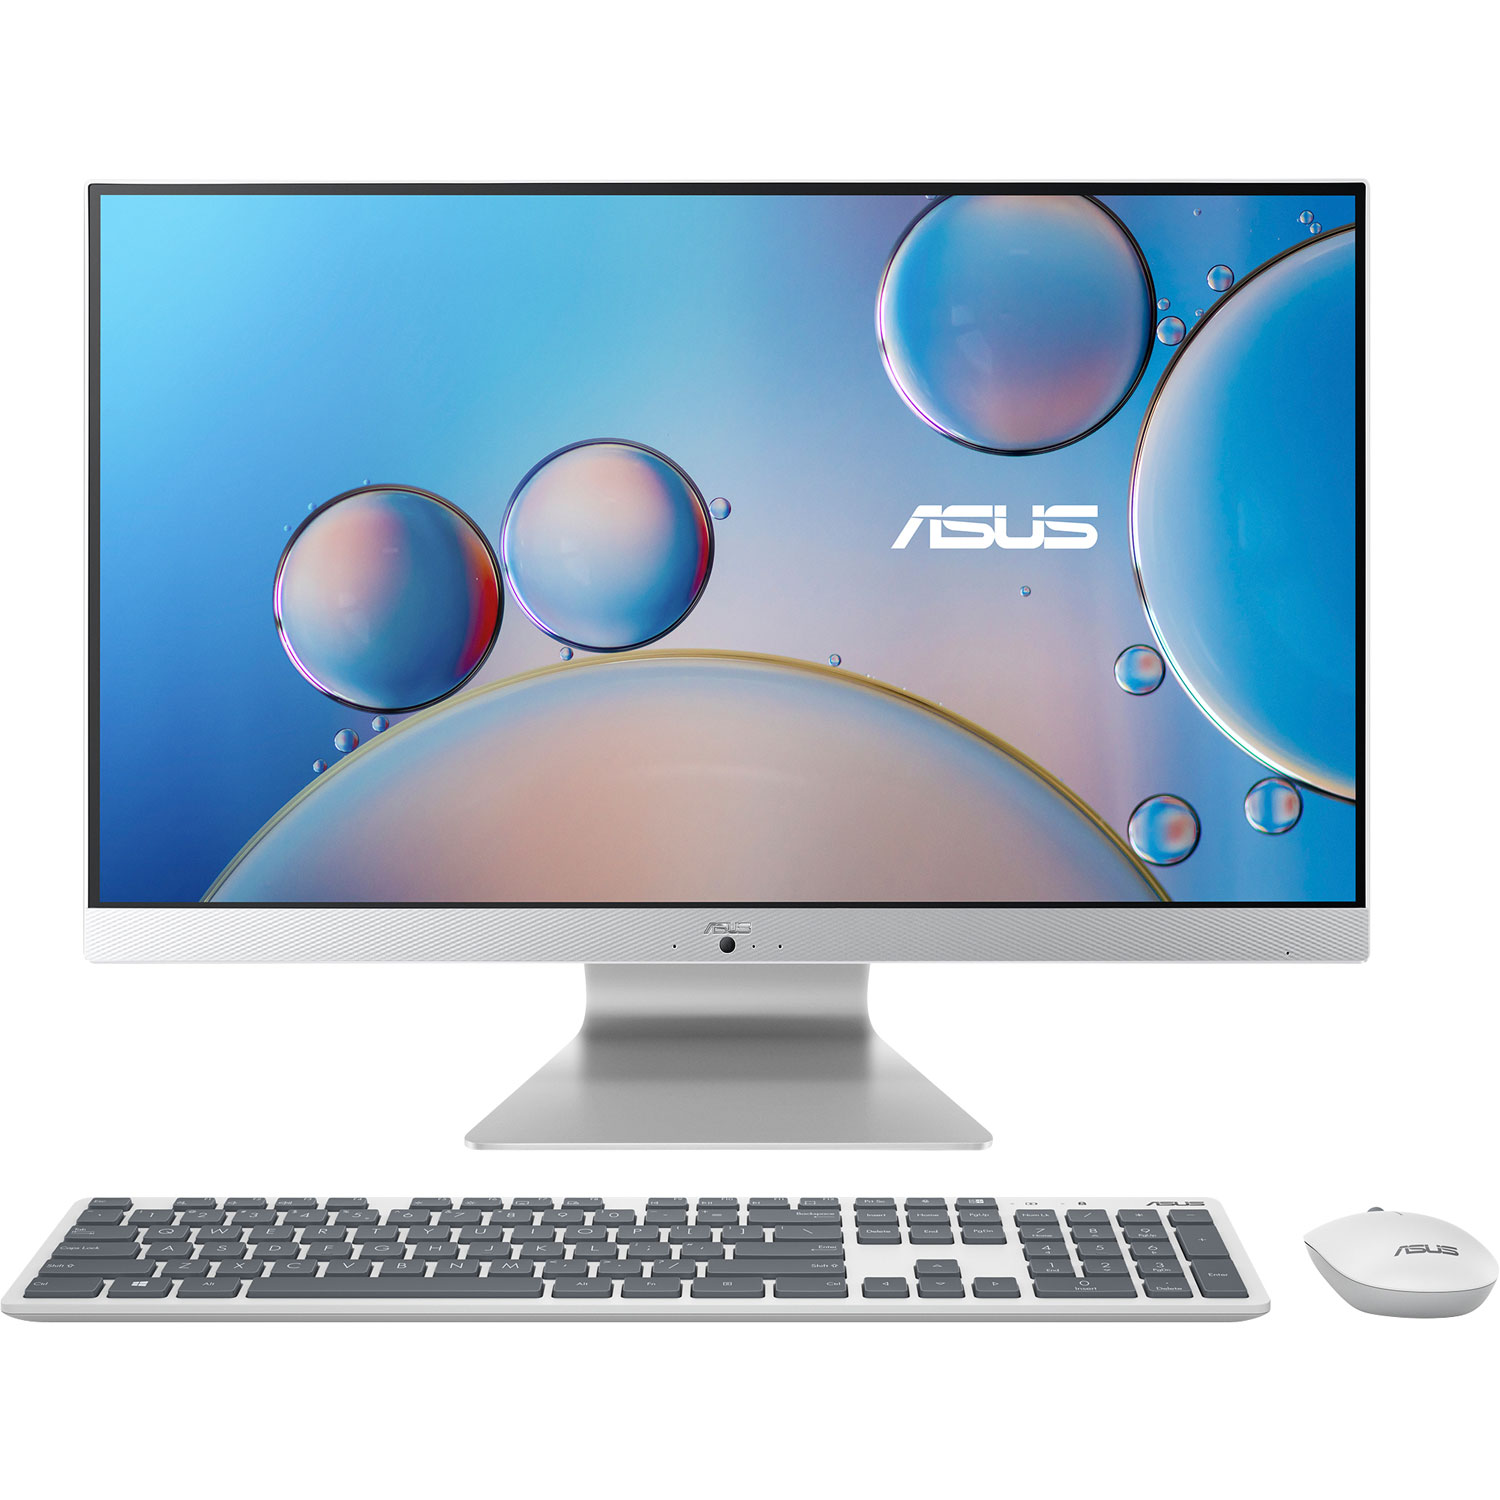 ASUS M3700 27" All-in-One PC - White (AMD Ryzen 5 5625U/1TB HDD/256GB SSD/16GB RAM) - Only at Best Buy